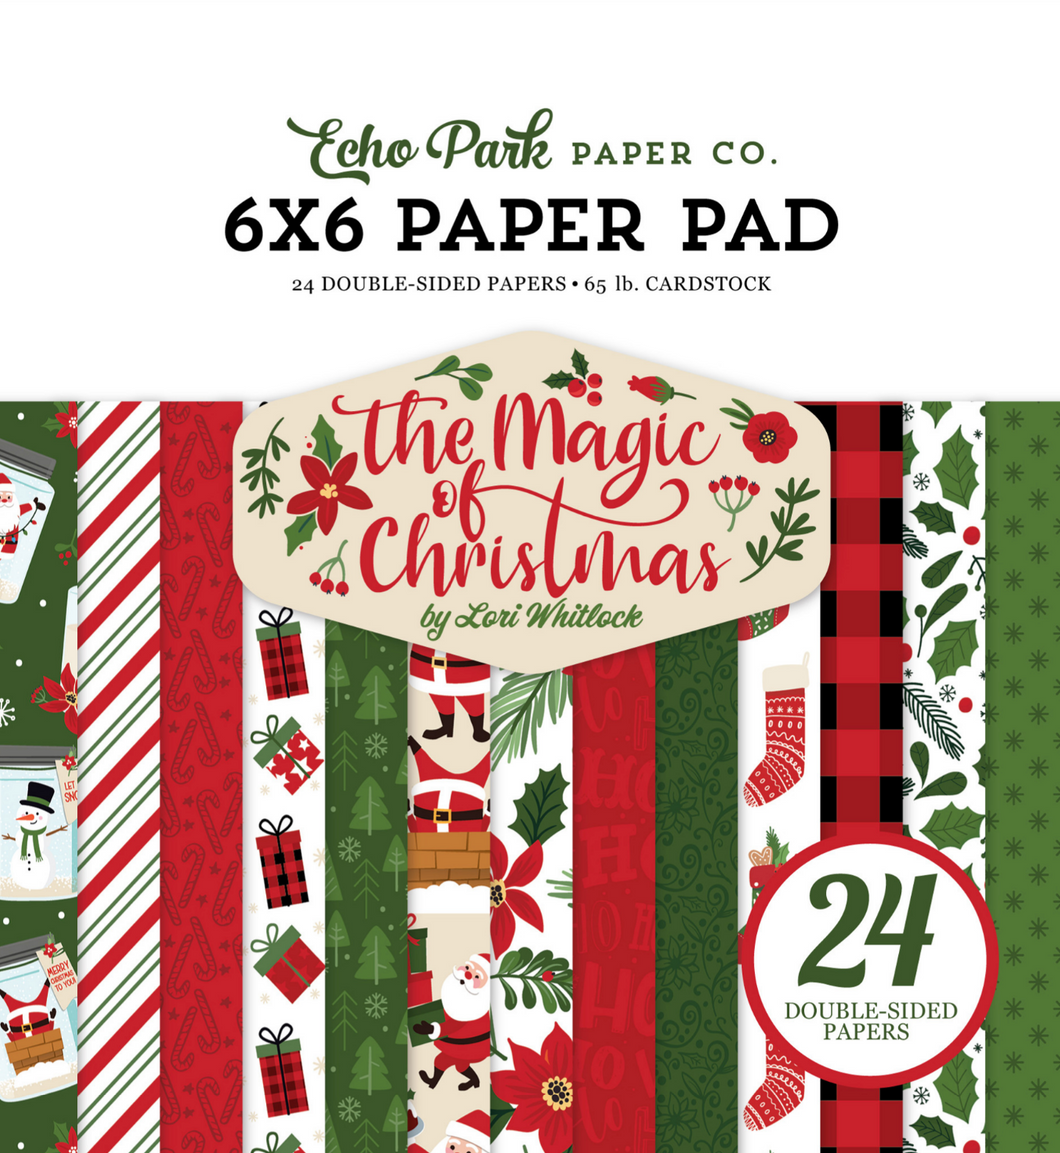 Echo Park: 6x6 Paper Pad - The Magic of Christmas